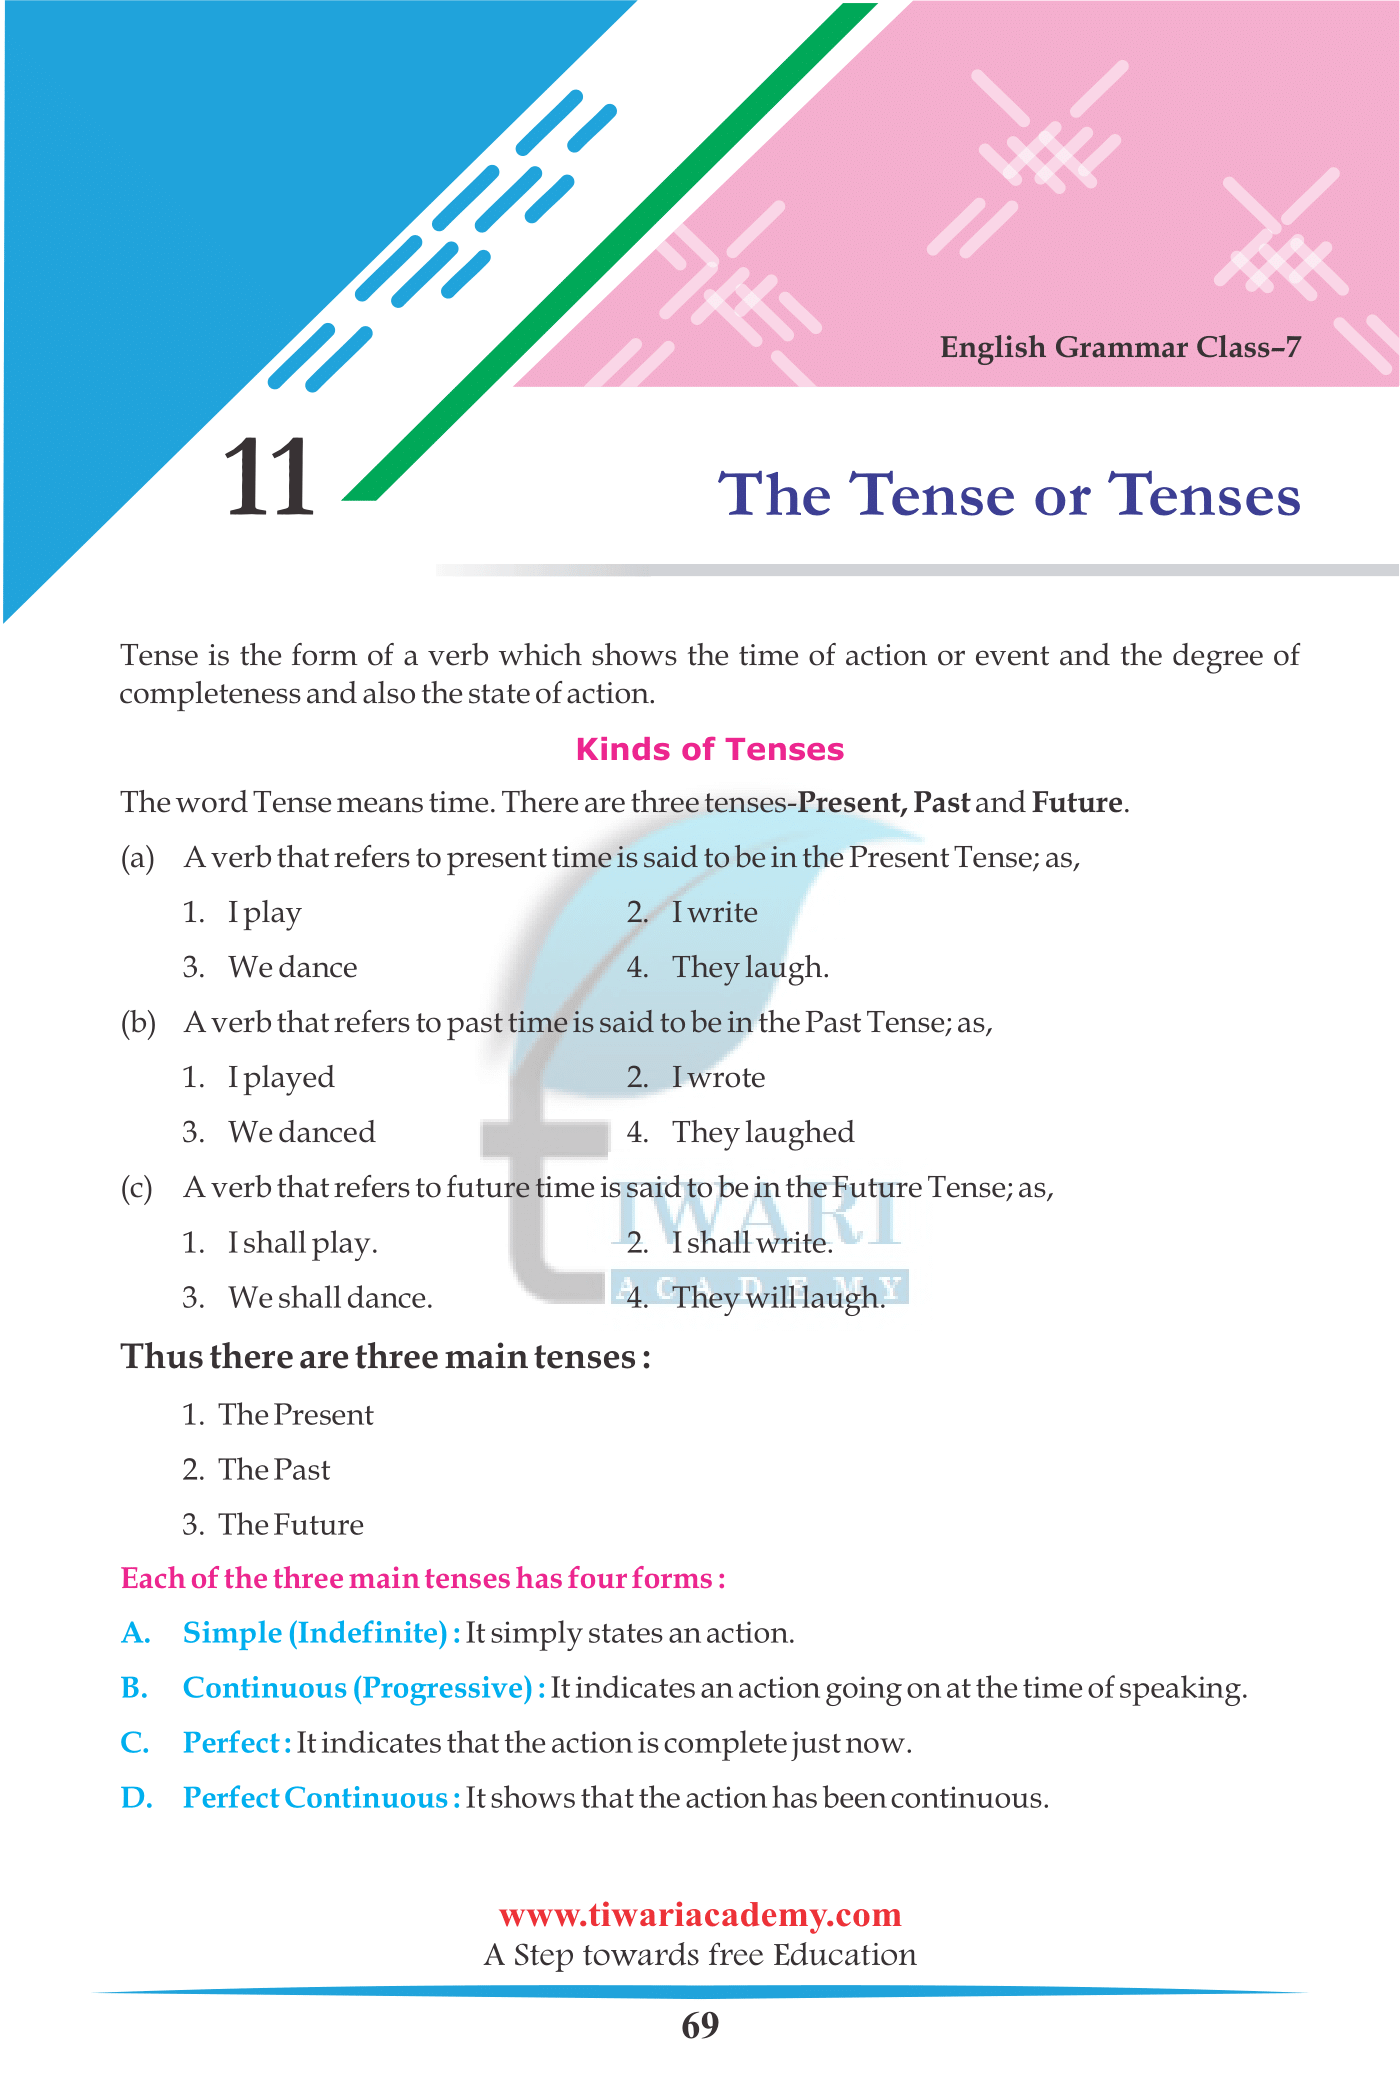 Class 7 English Grammar Chapter 11 The Tense or Tenses